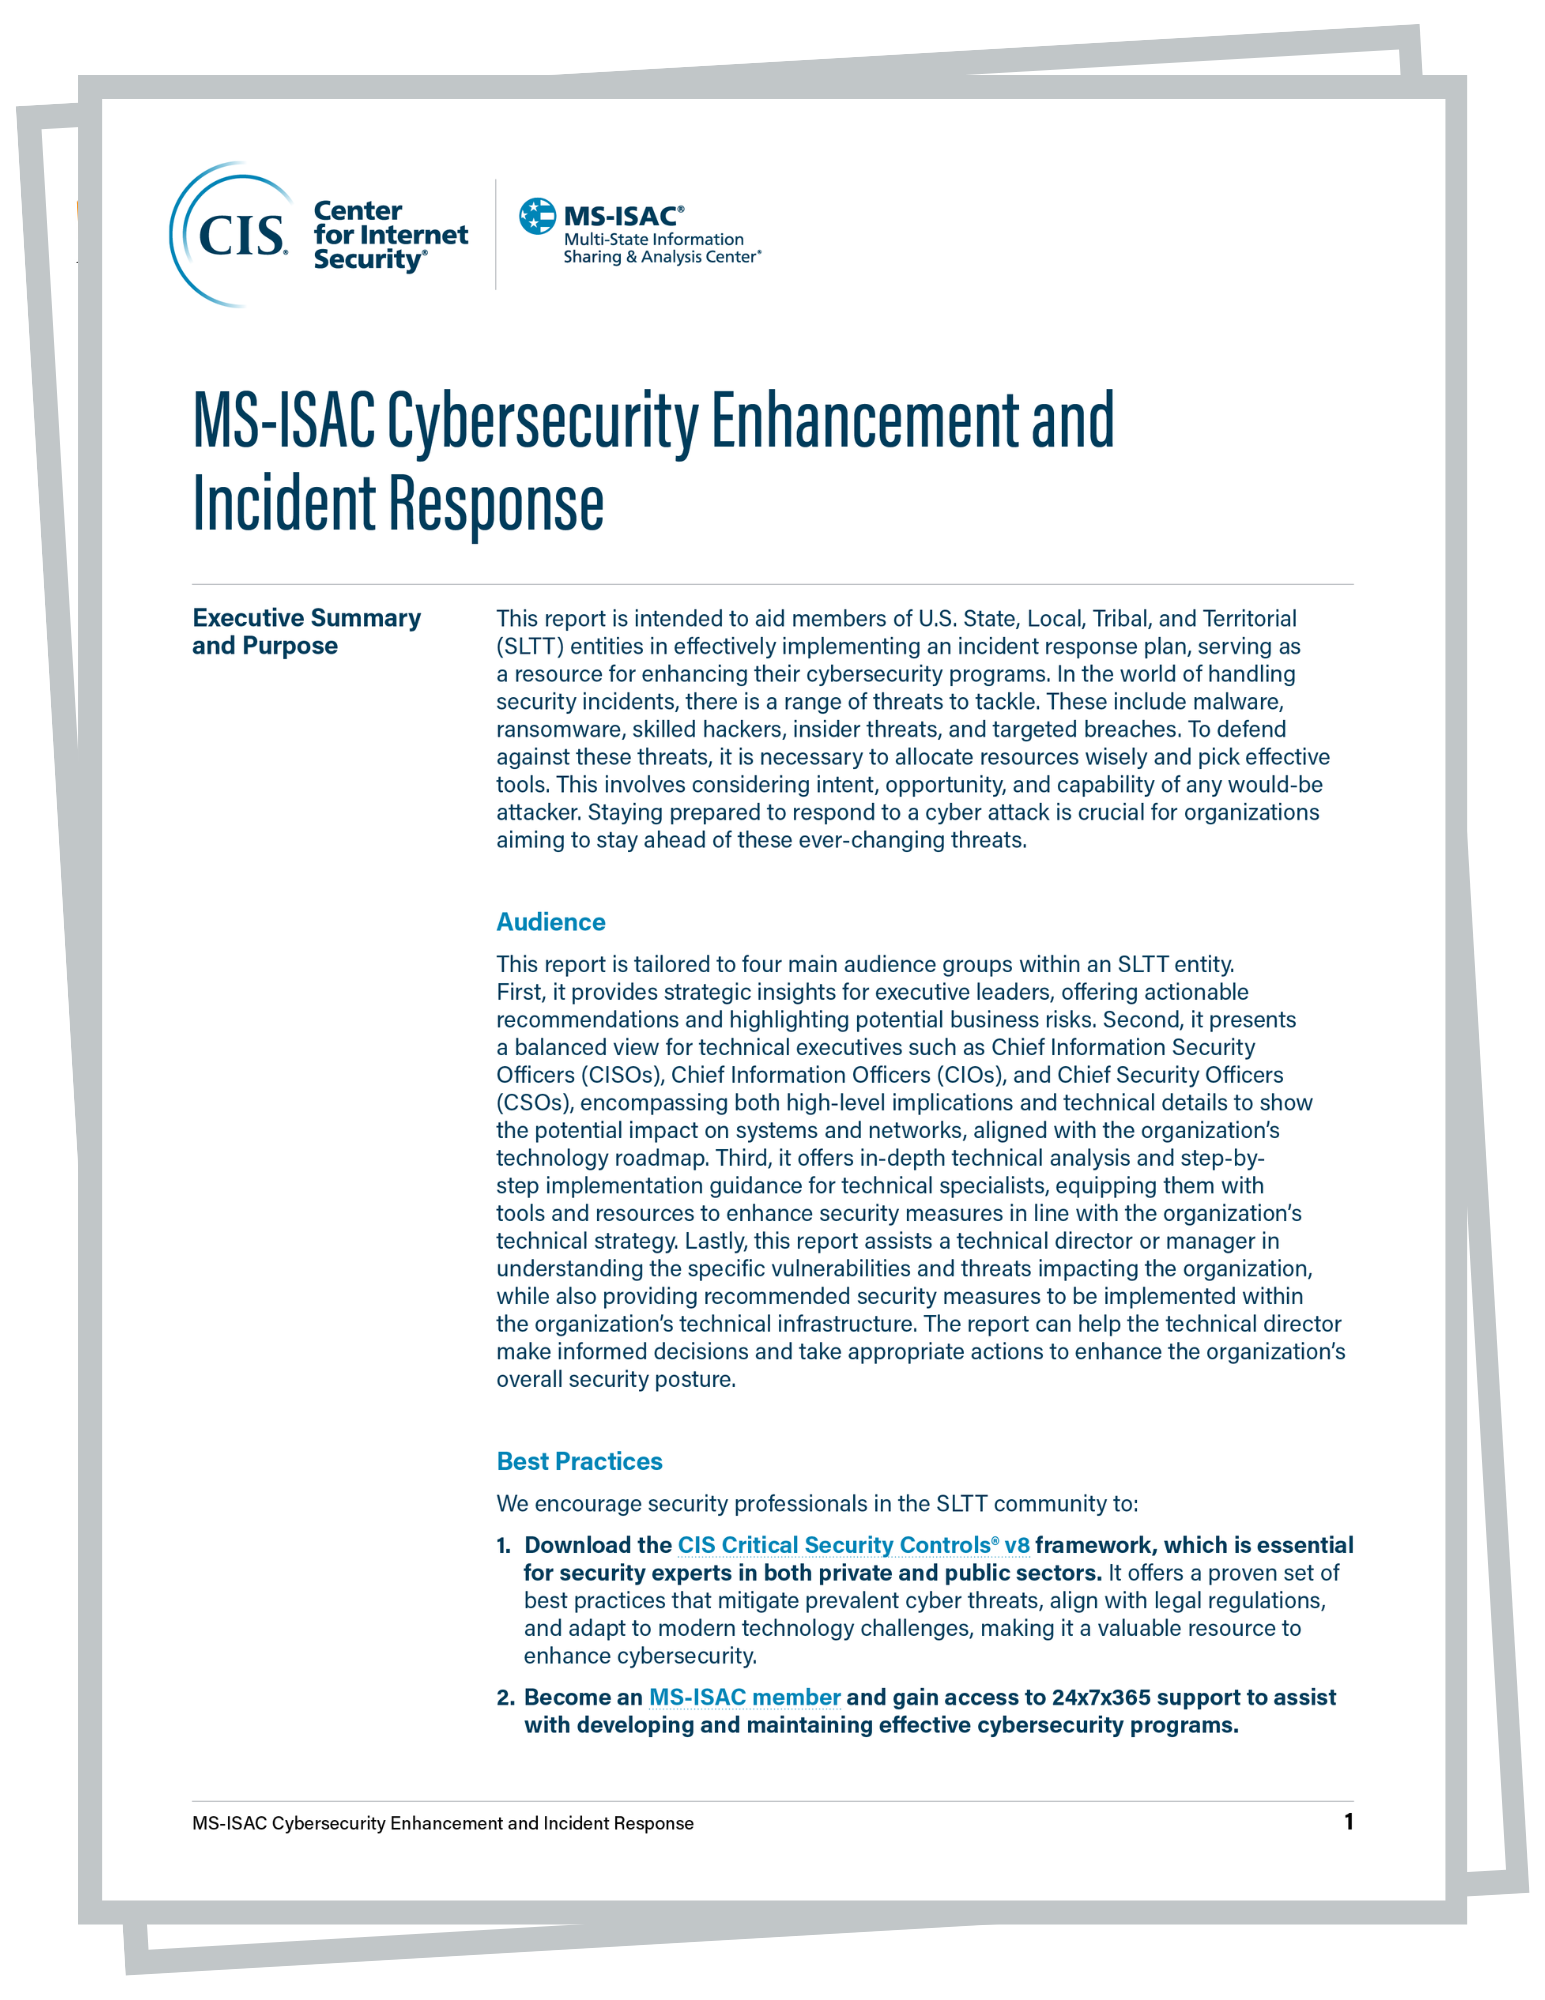 MS-ISAC Cybersecurity Enhancement and Incident Response cover image